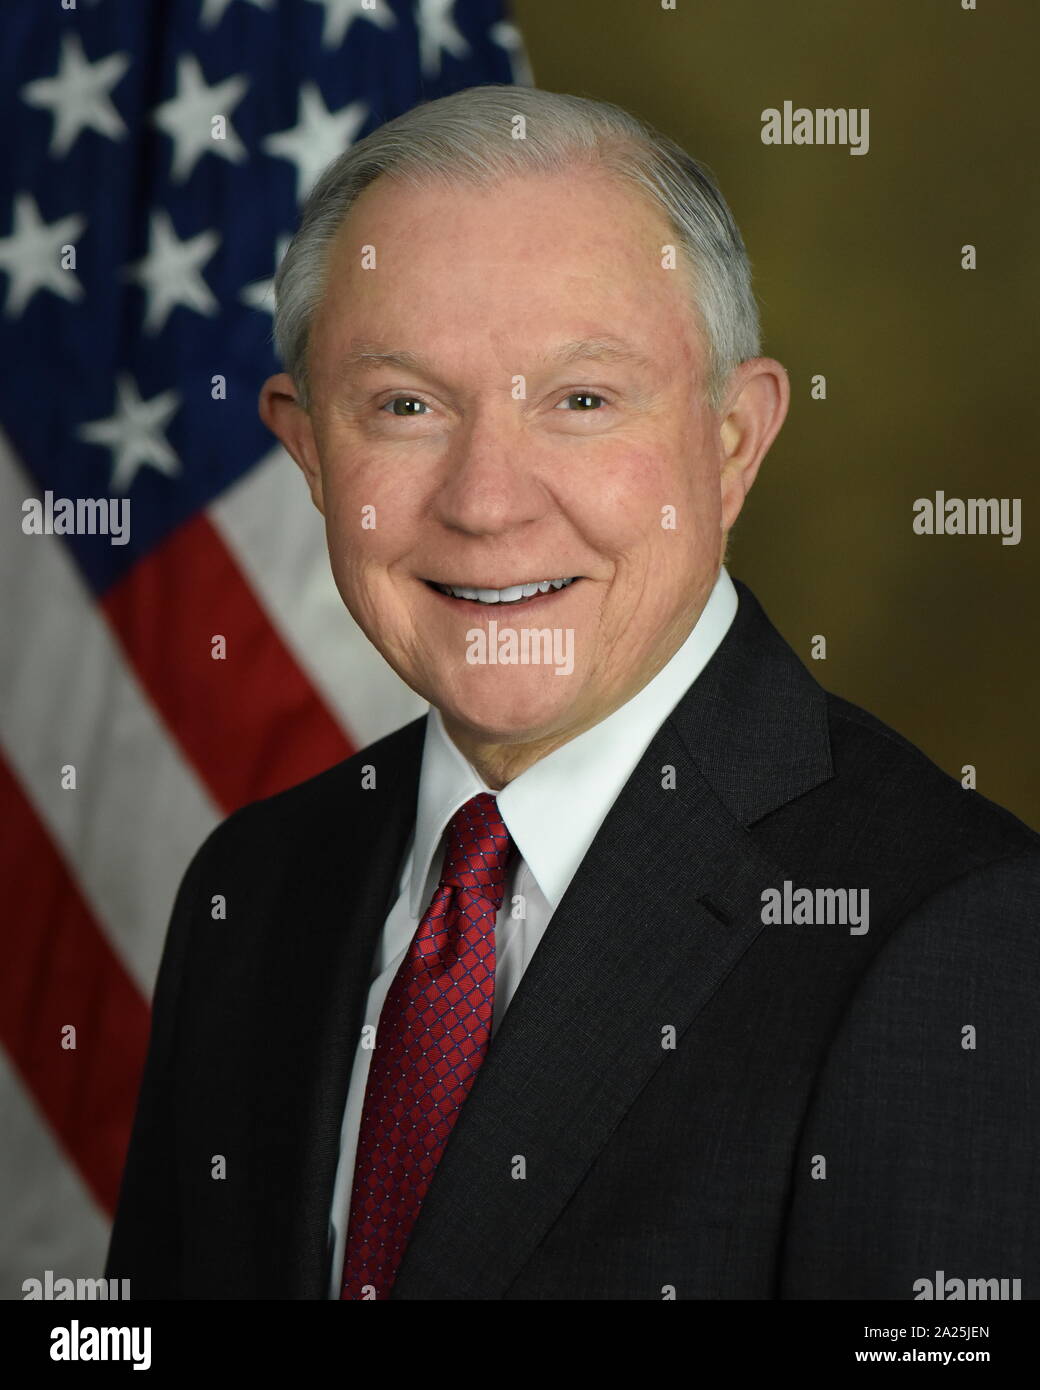 Jeff Sessions III (born December 24, 1946), American politician and lawyer who served as United States Attorney General from 2017 to 2018. A Republican, Sessions previously served as United States Senator from Alabama from 1997 to 2017, resigning from the position in order to serve in the Trump administration. Stock Photo